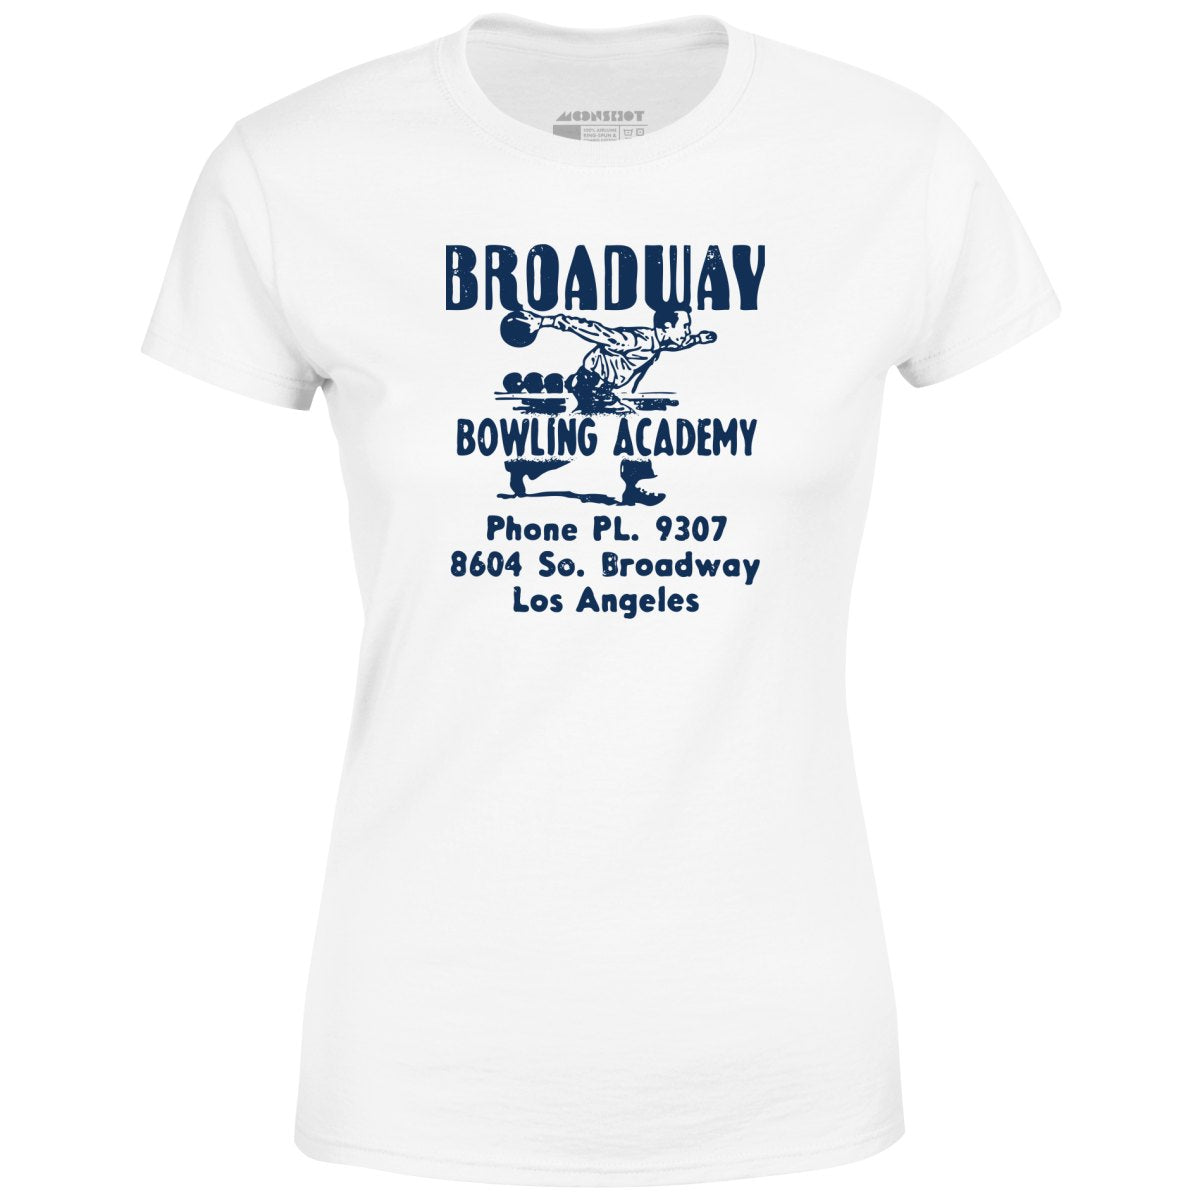 Broadway Bowling Academy - Los Angeles, CA - Vintage Bowling Alley - Women's T-Shirt